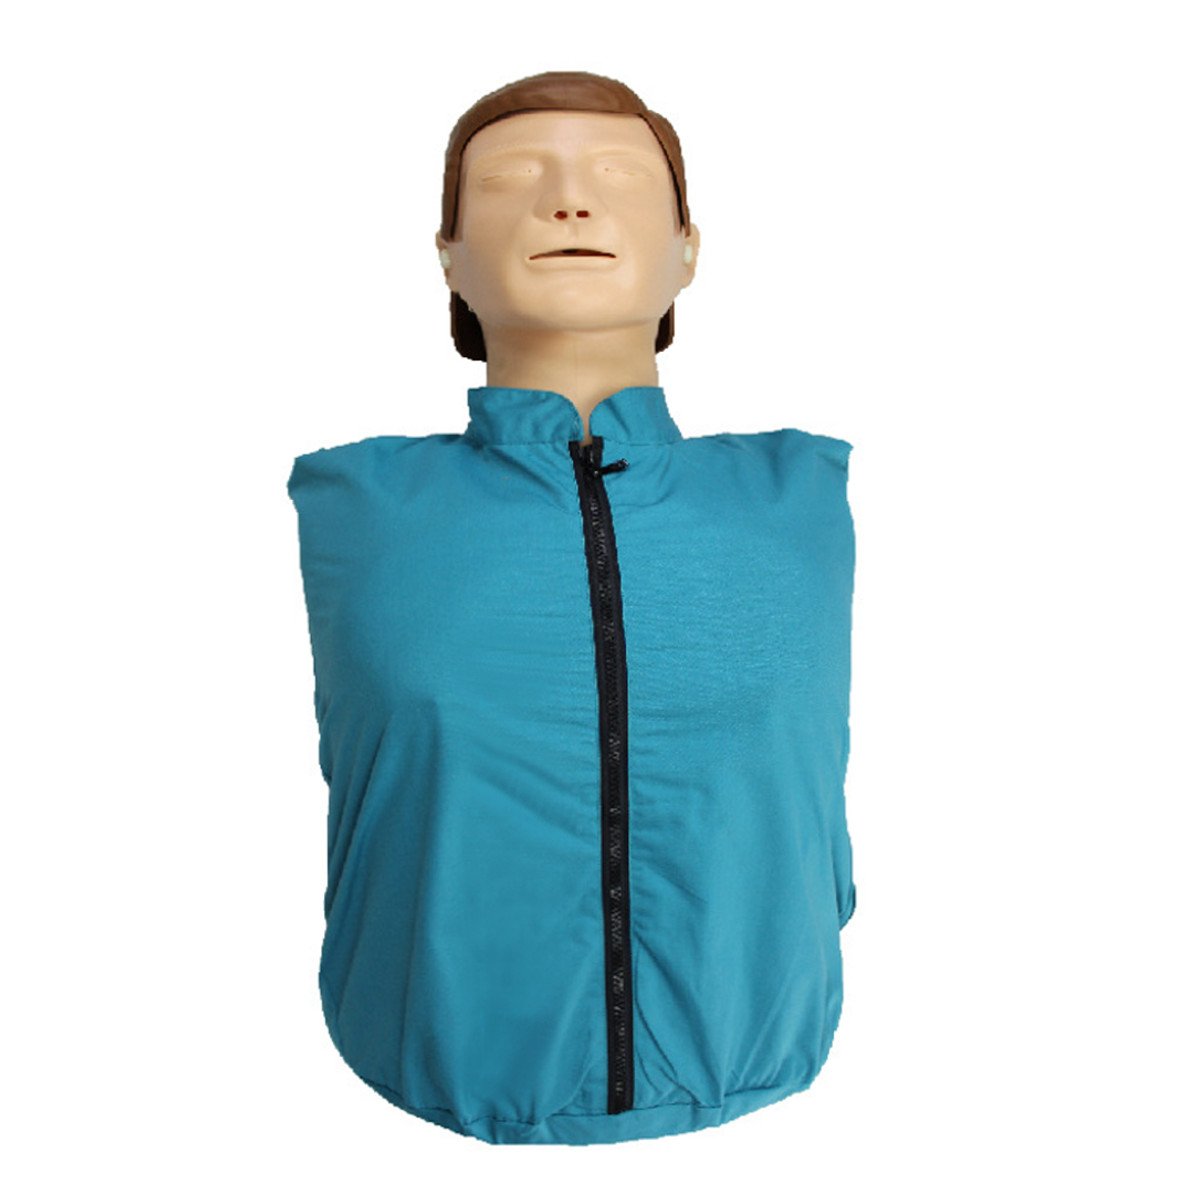 CPR Adult Manikin AED First Aid Training Dummy Training Medical Model Respiration Human 1